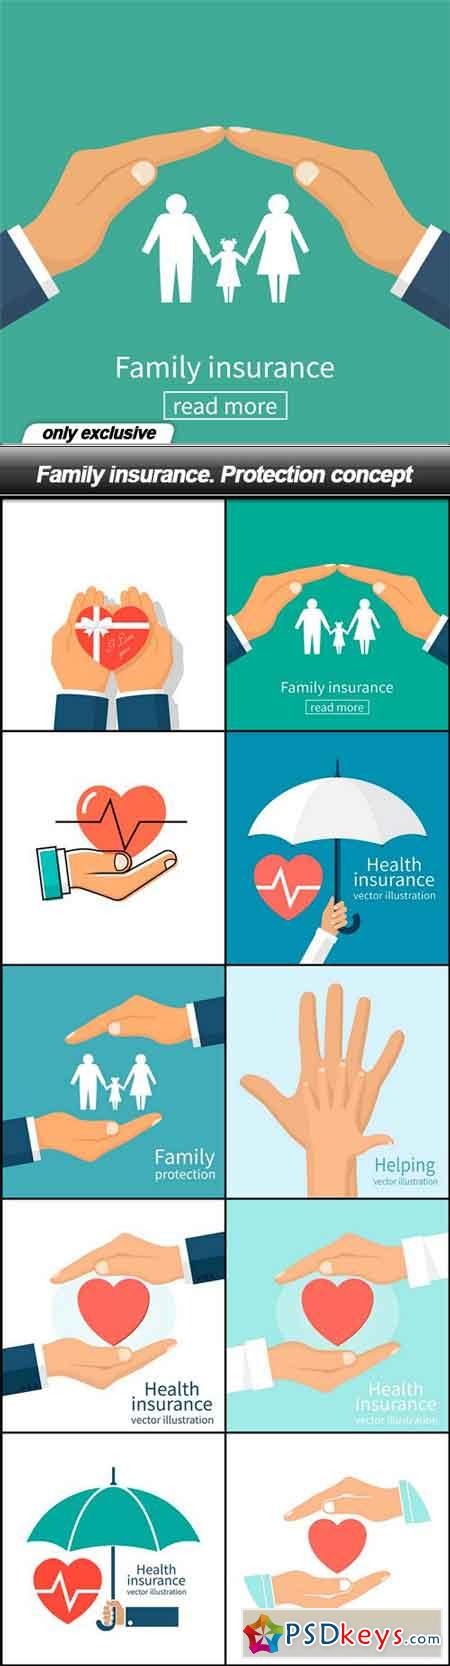 Family insurance. Protection concept - 10 EPS